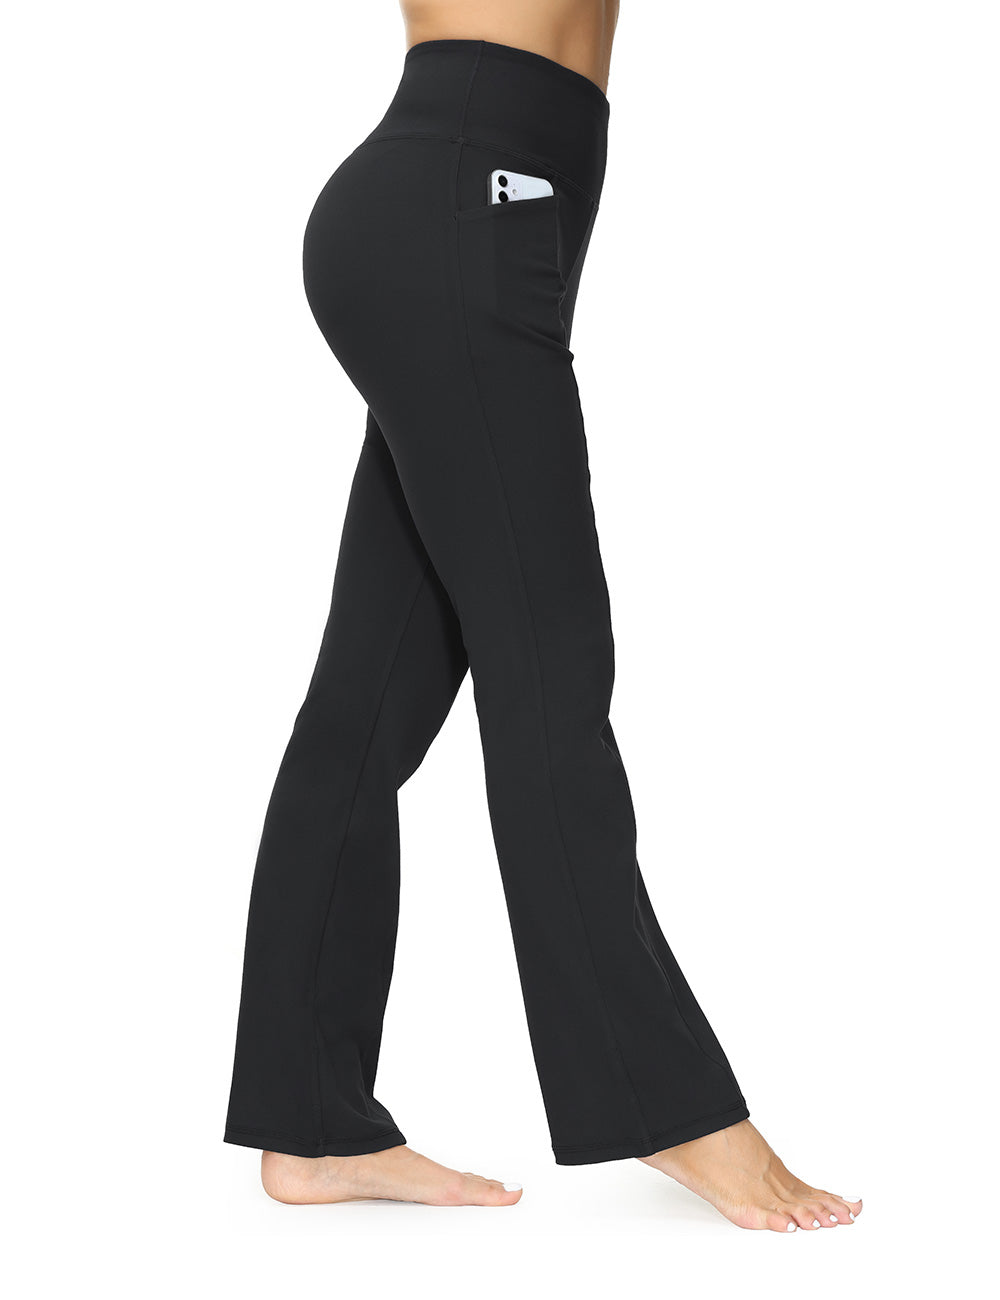 ALONG FIT Yoga Pants- Product Review 